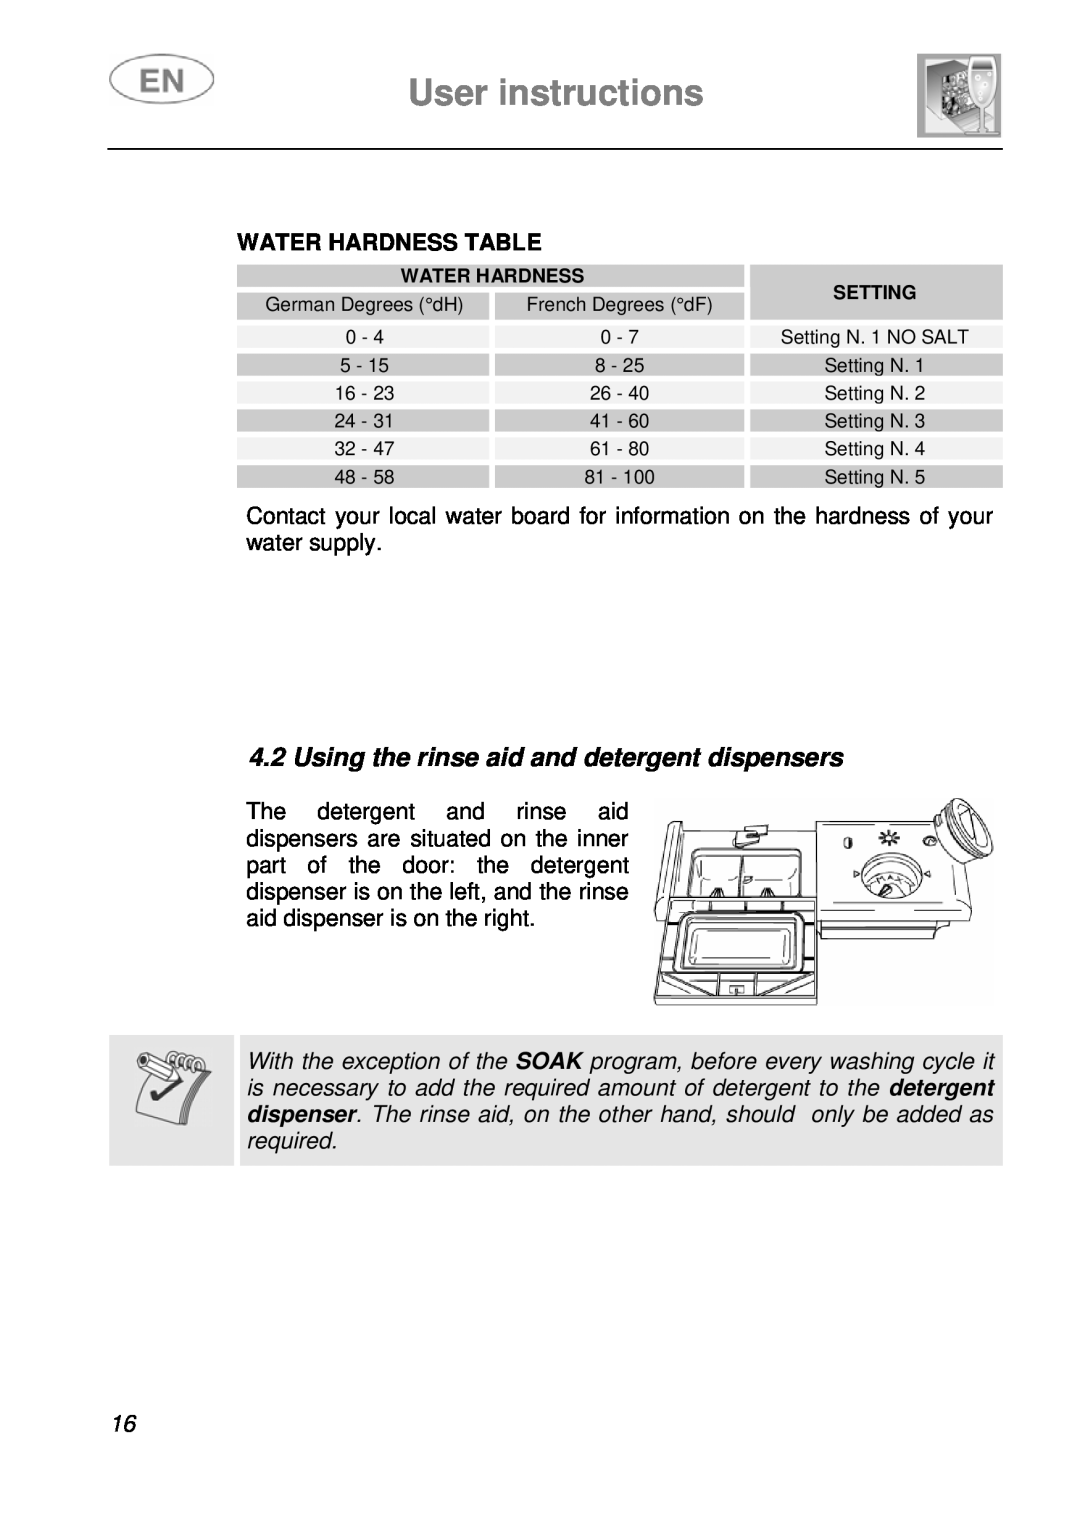 Smeg ST4108 manual Using the rinse aid and detergent dispensers, User instructions, Water Hardness Table 